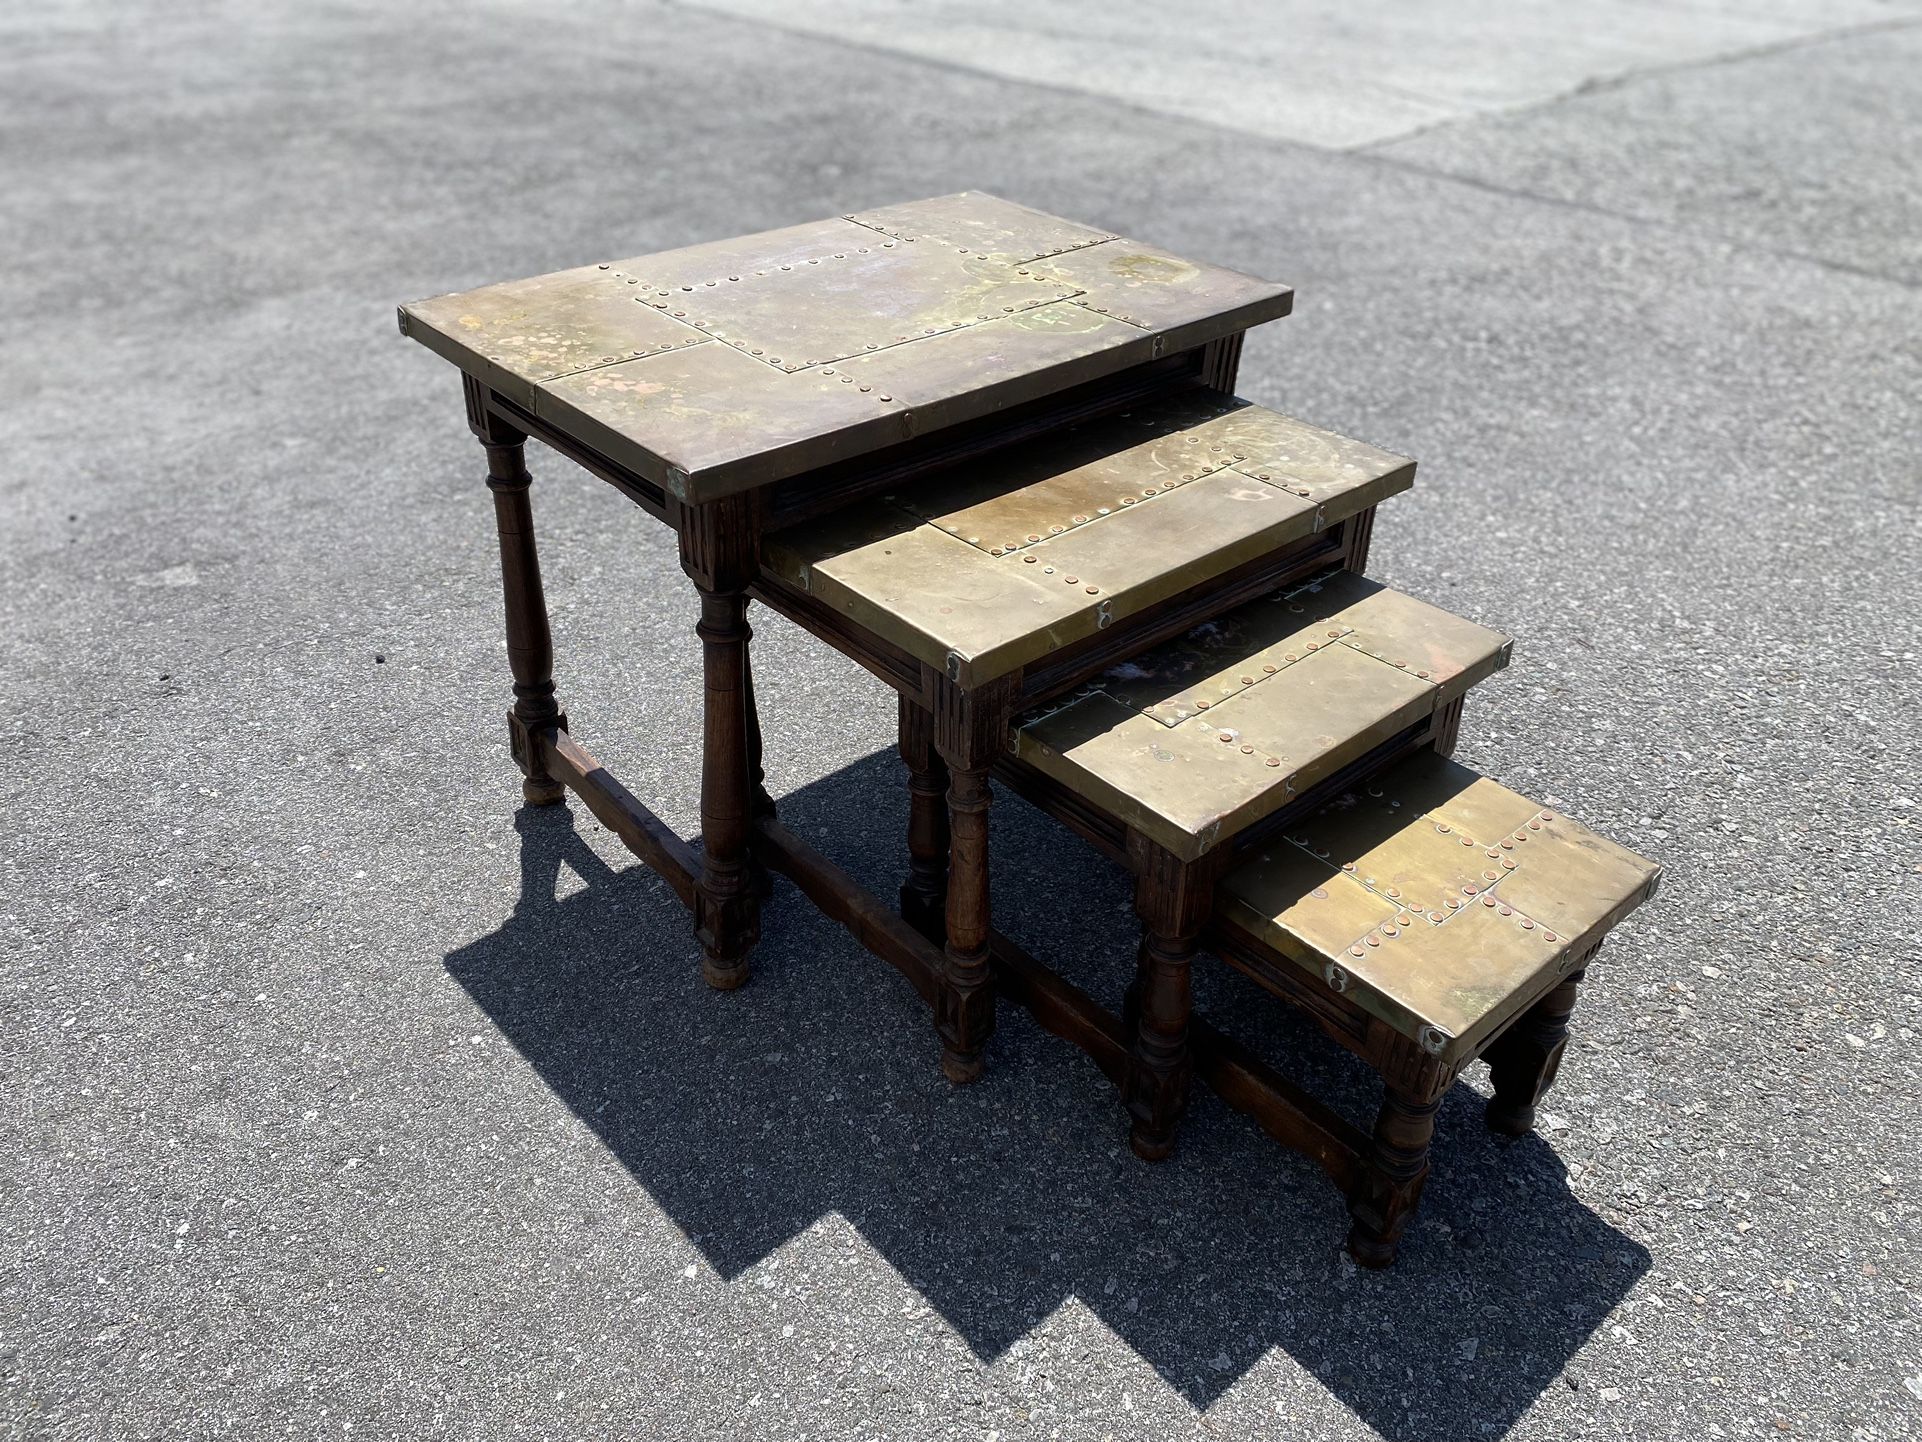 Rare Antique Stacking Tables From 1780